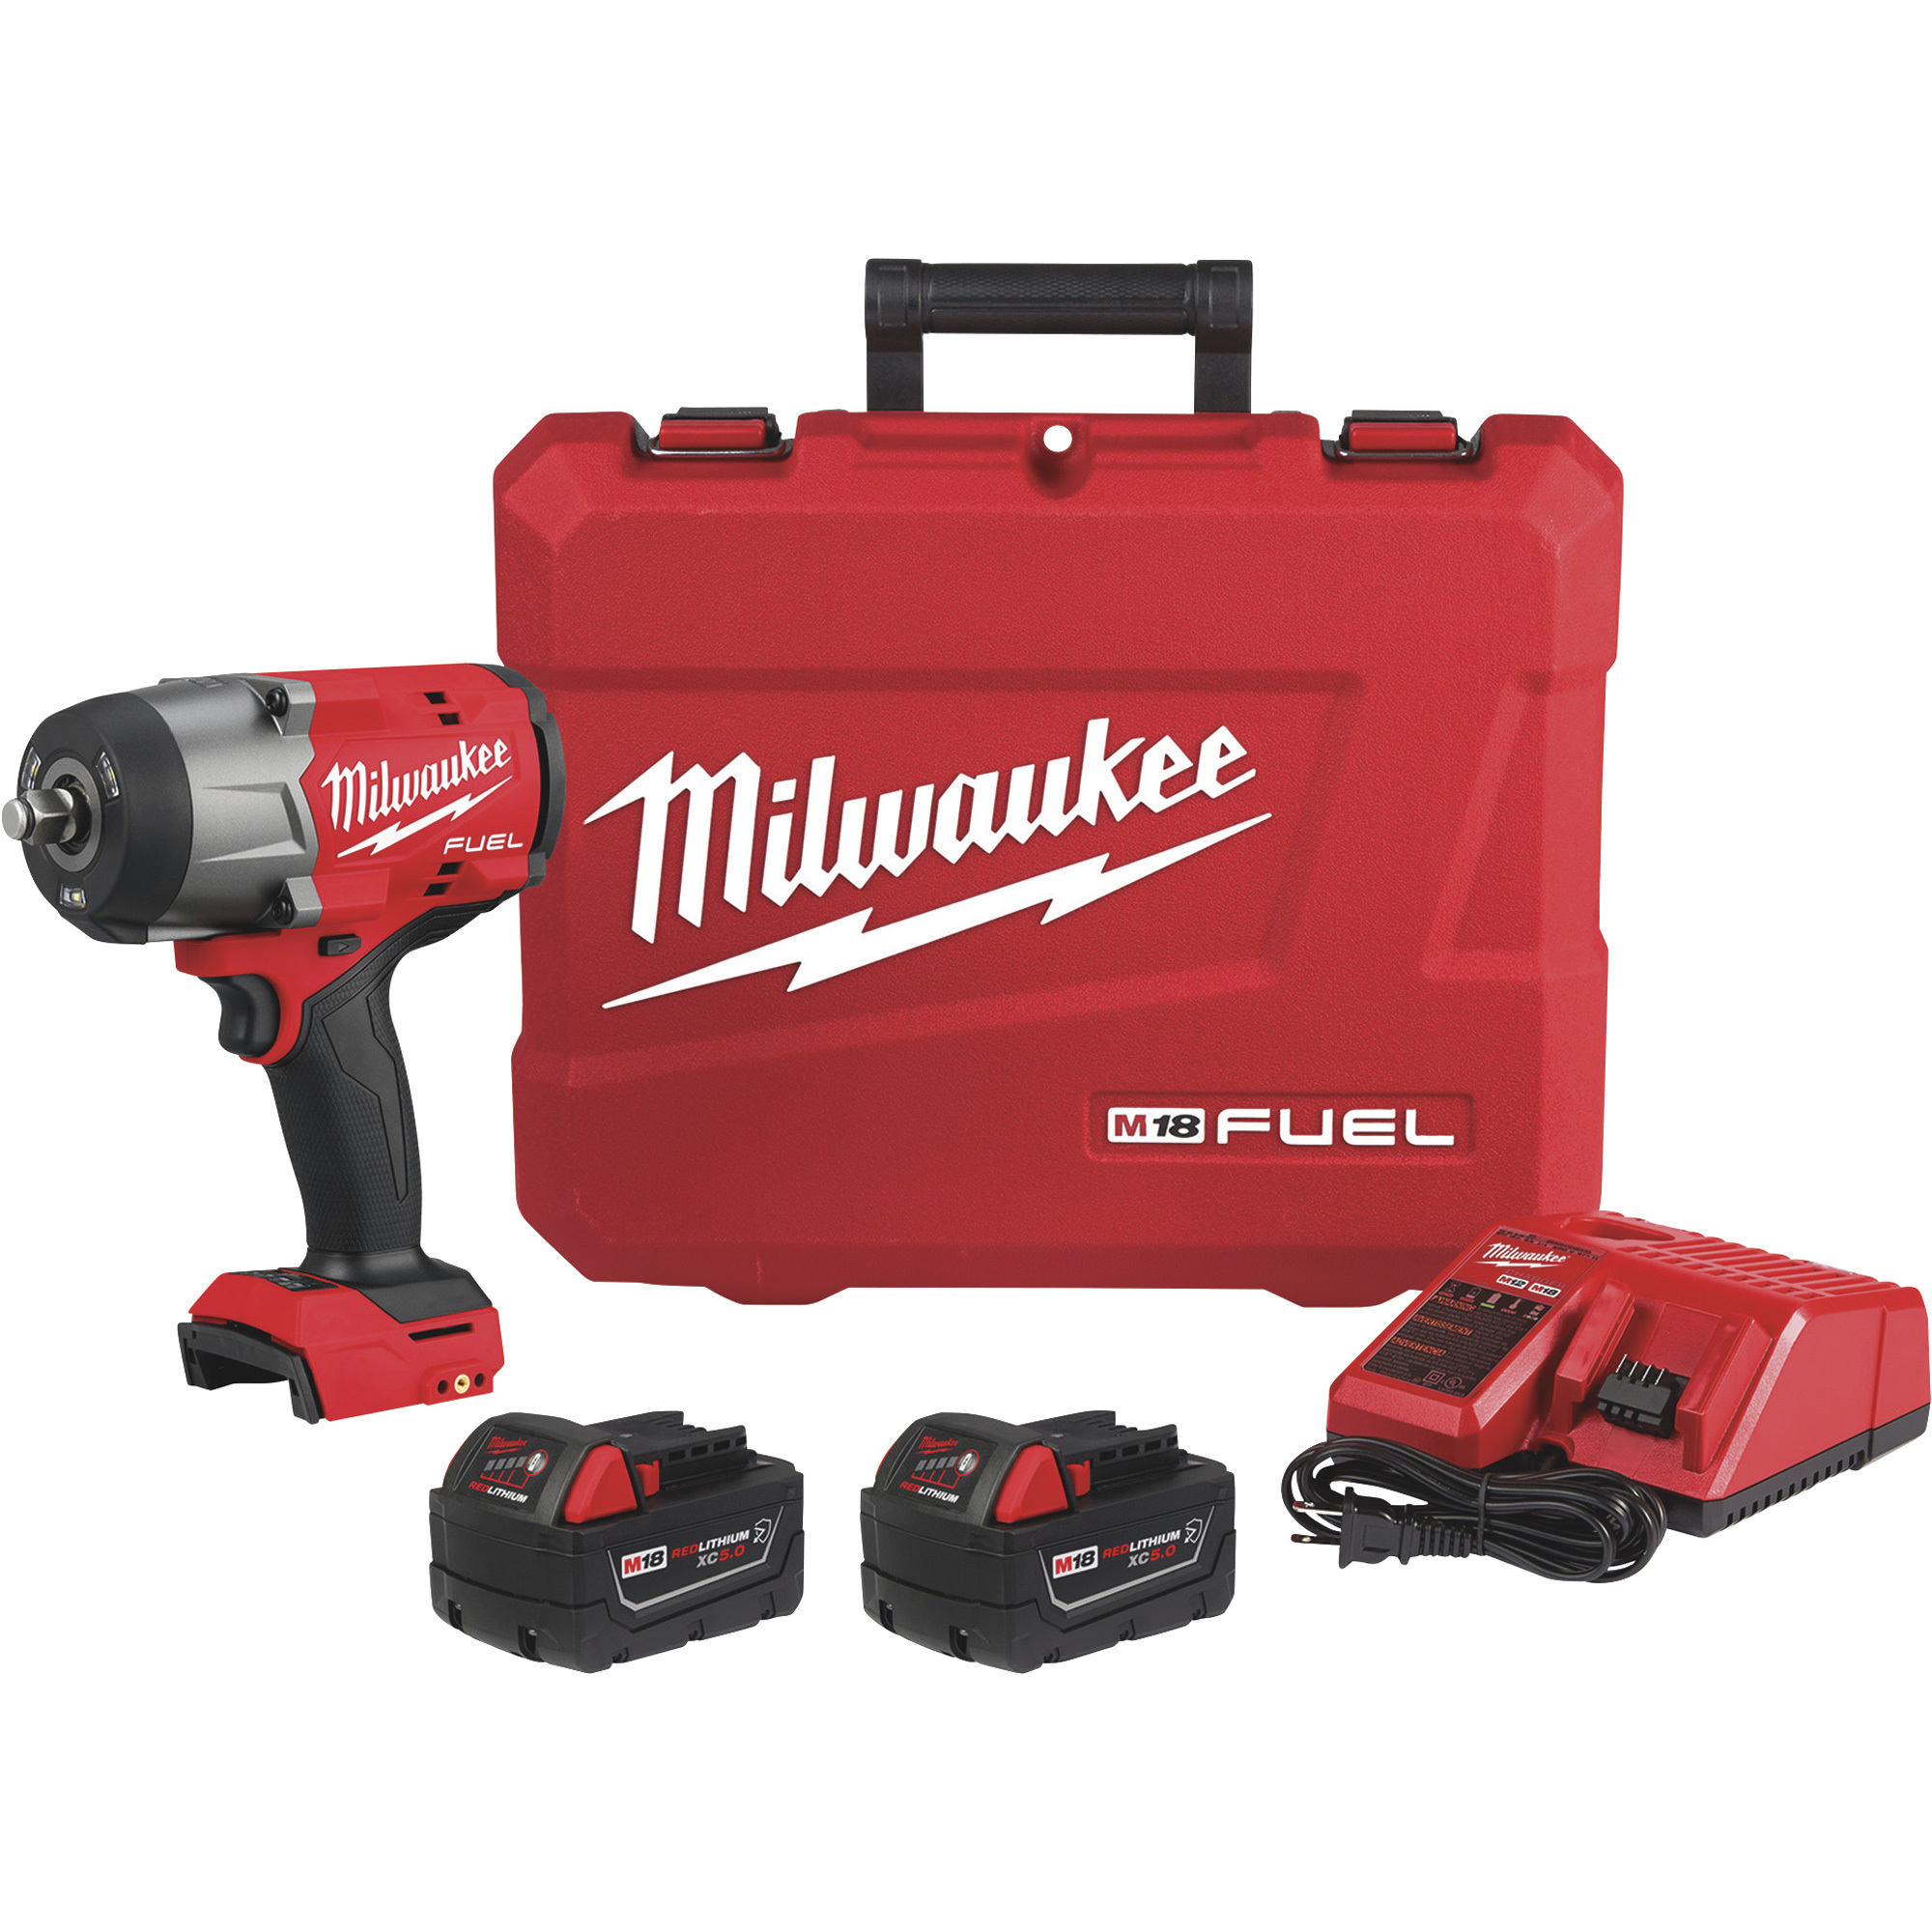 Milwaukee, M18 1/2Inch High Torque Impact Wrench FrictRing Kit, Drive Size 1/2 in, Volts 18 Battery Type Lithium-ion, Model 2967-22